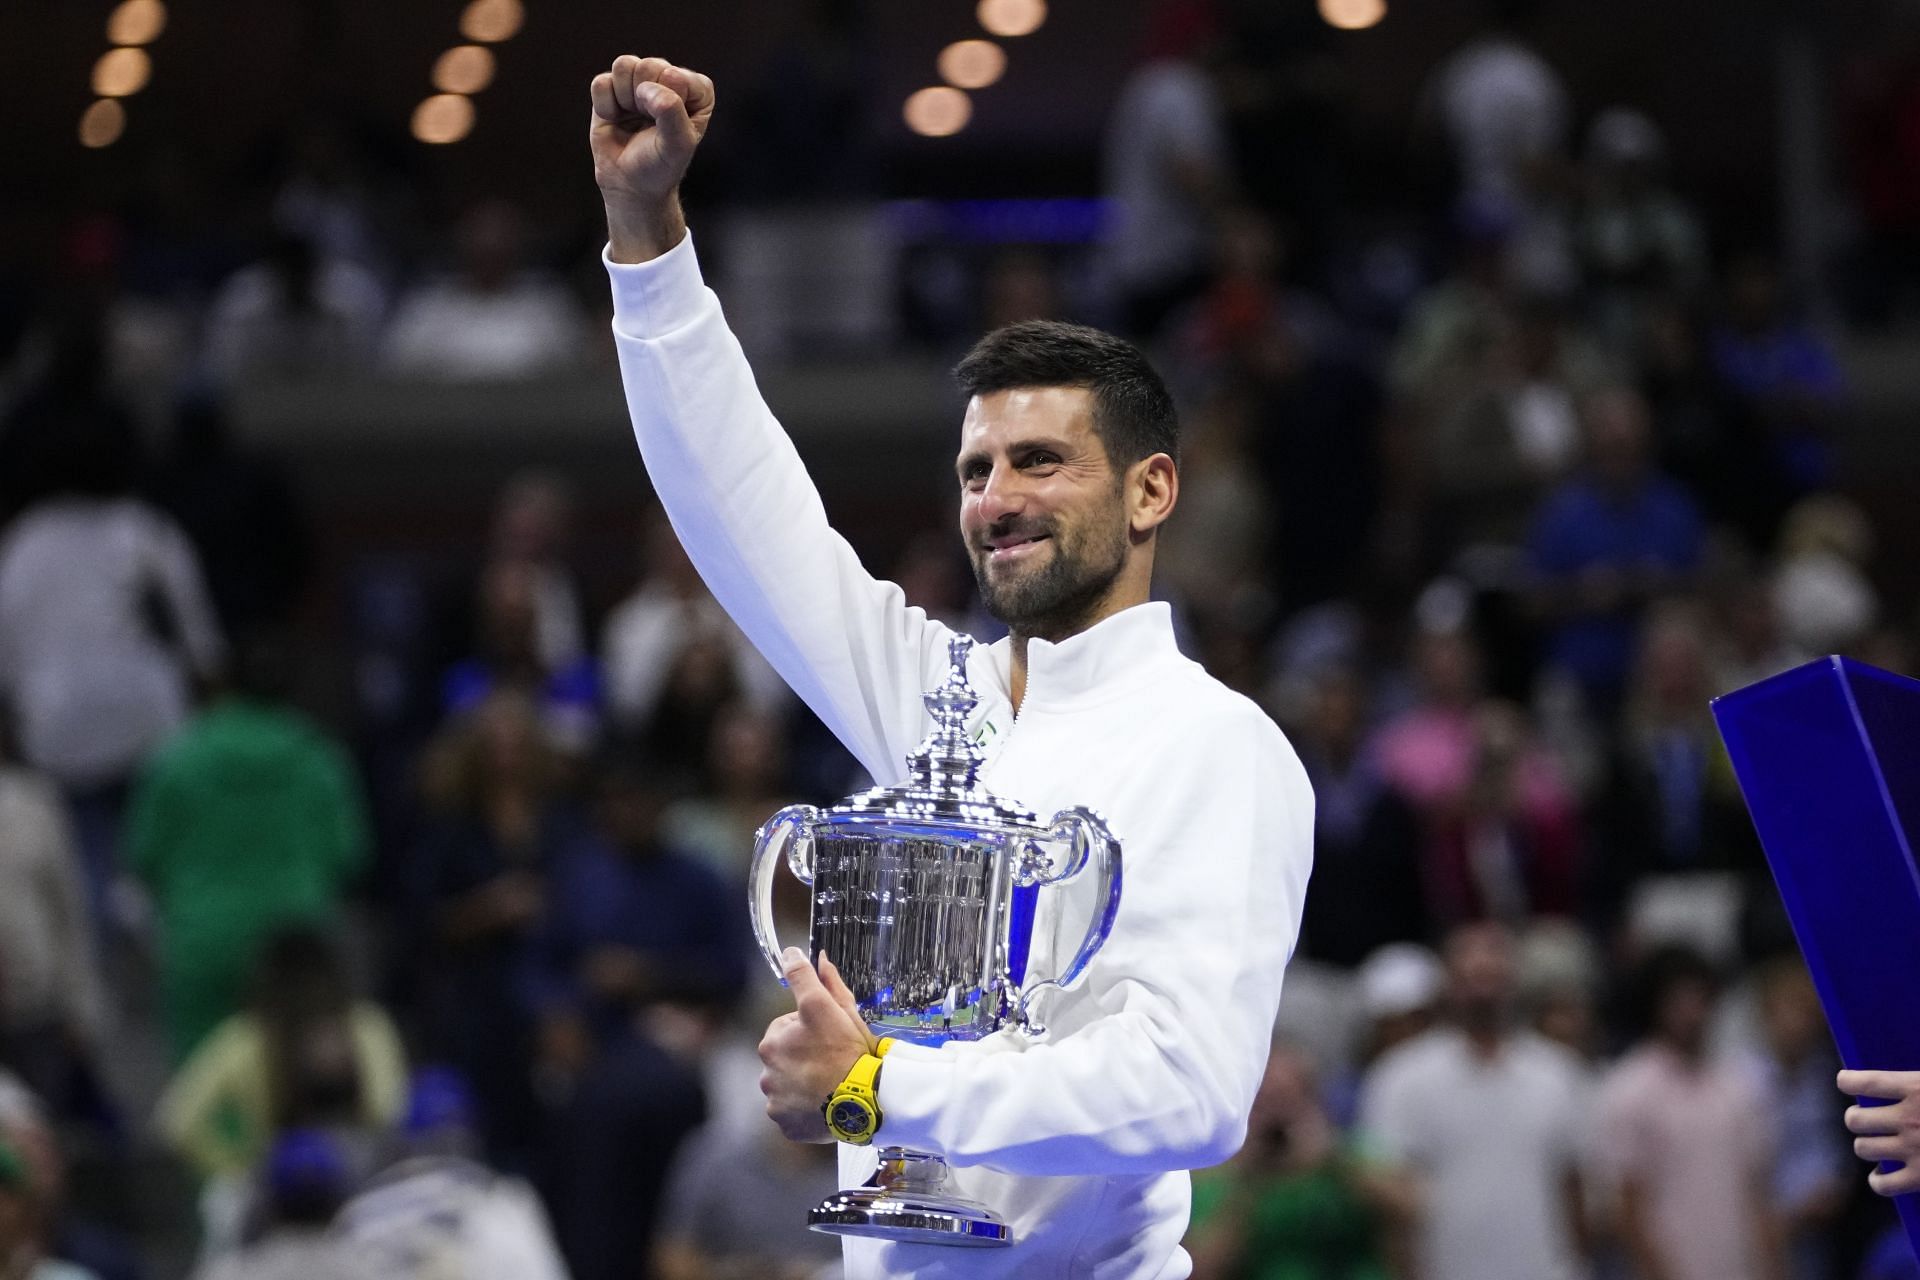 The Serb poses with the 2023 US Open trophy